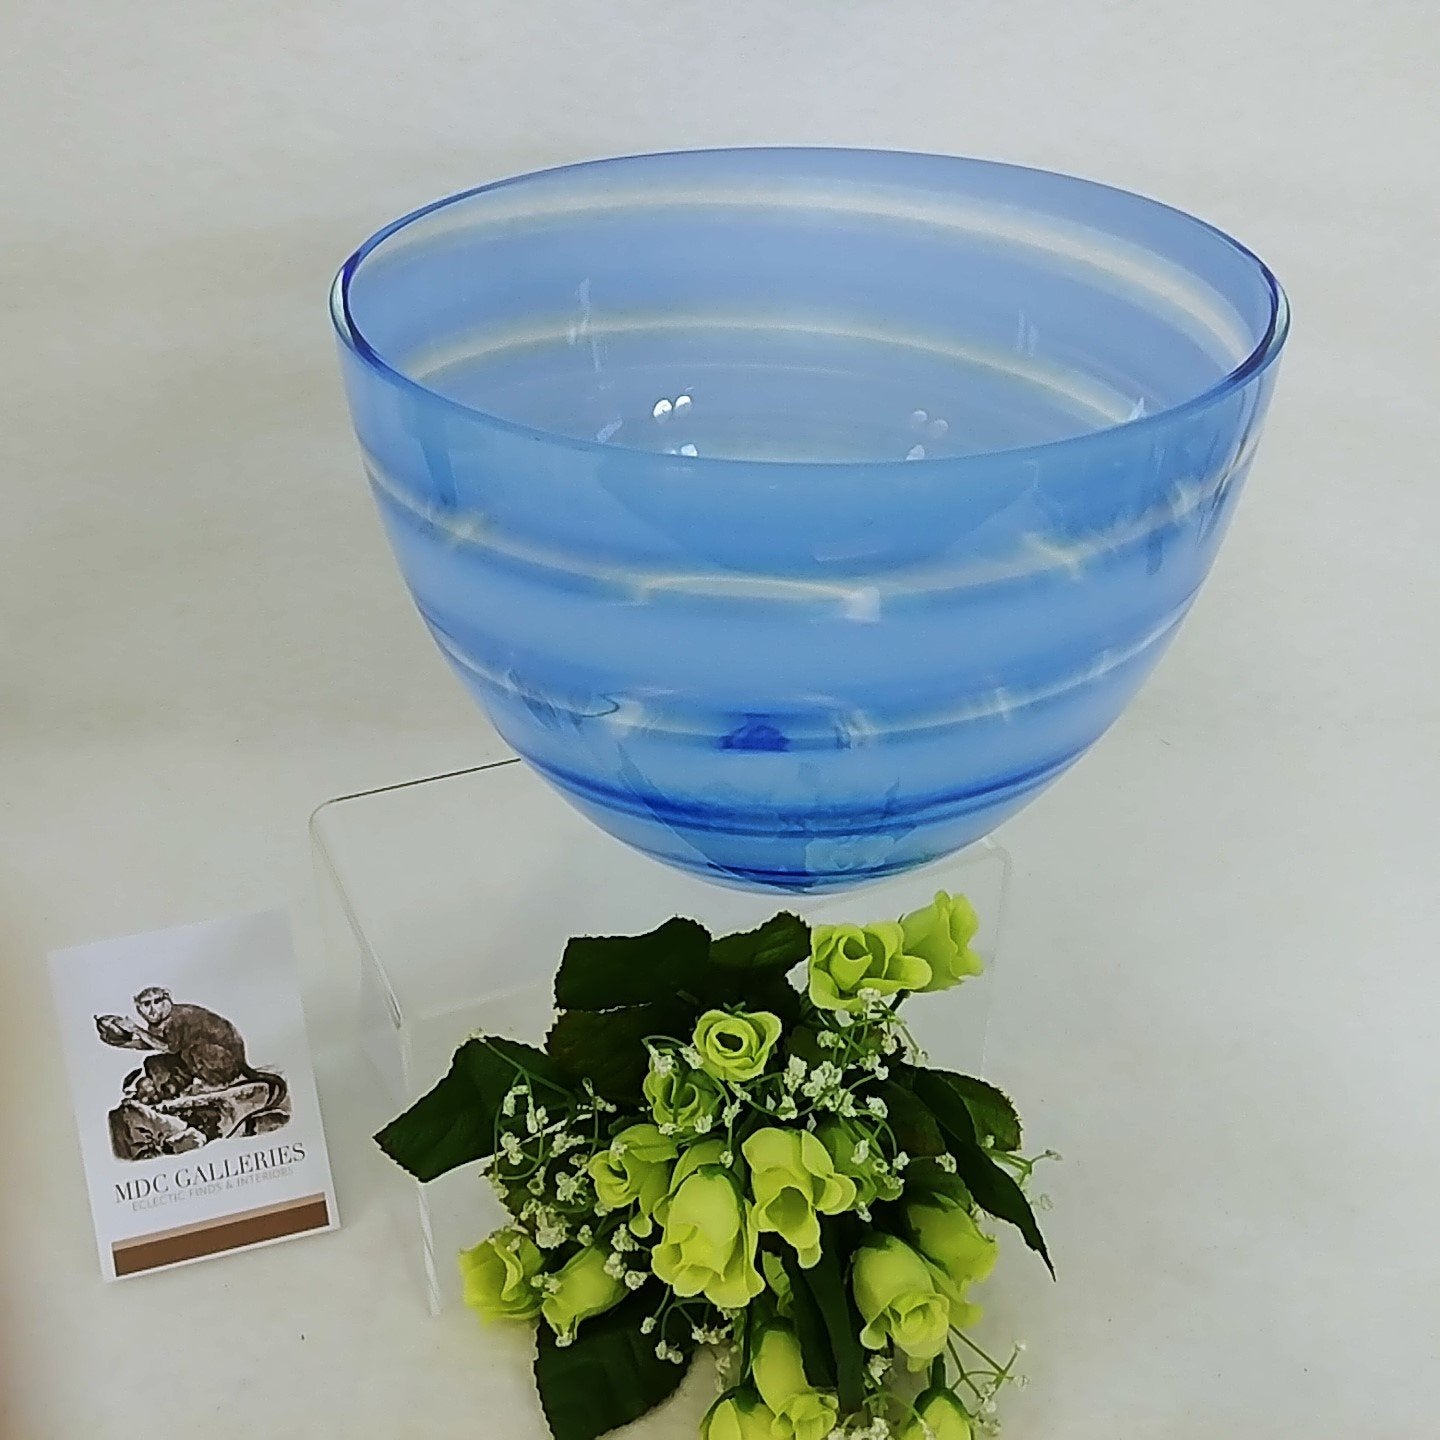 Bowl Clear Glass Frosted Blue Swirls Serving Bowl Home Decor